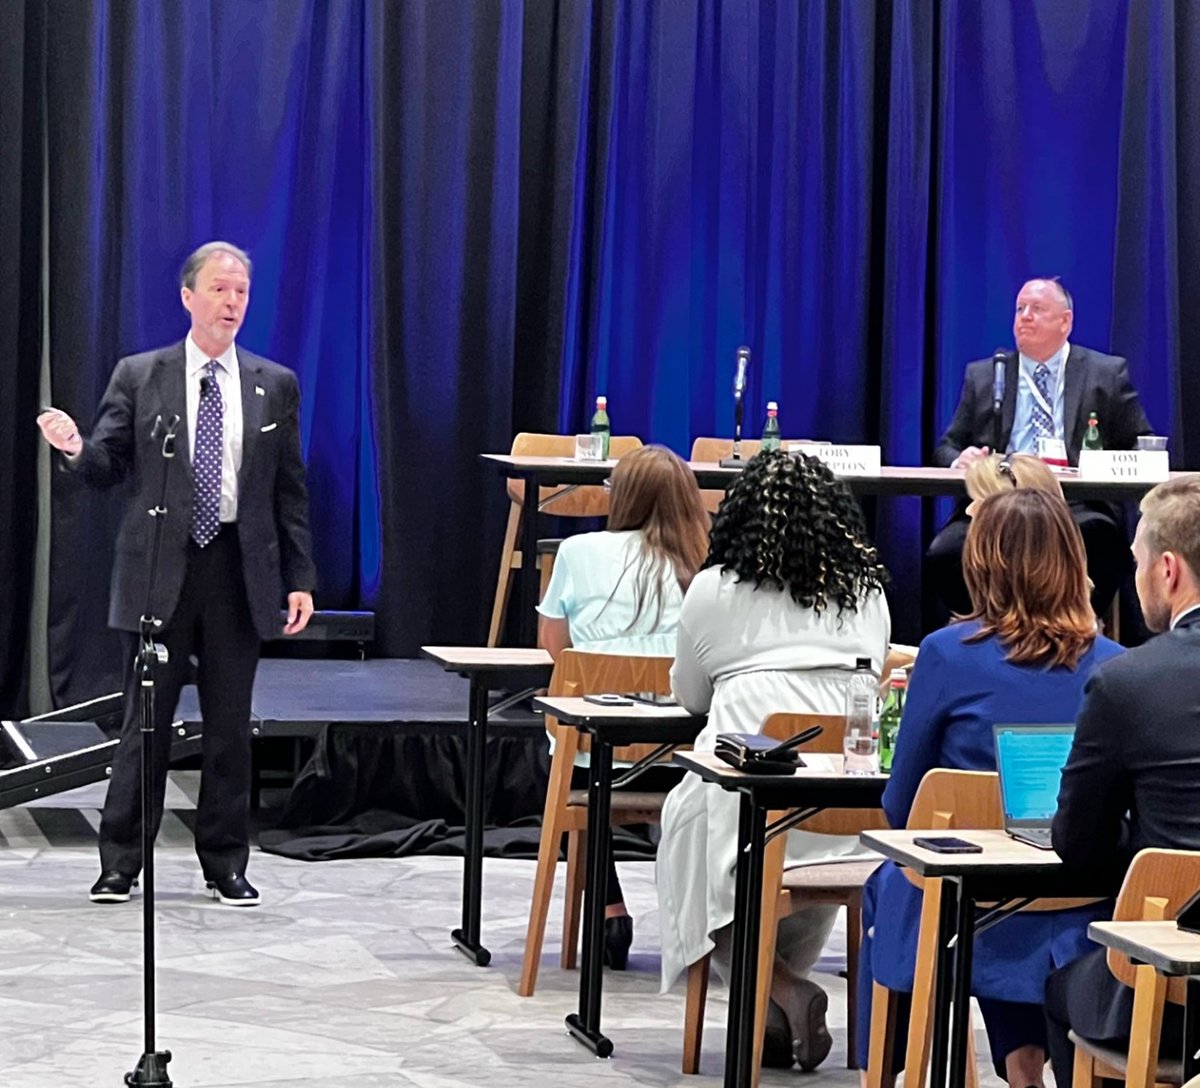 ASC Executive Director James Park recently spoke at AARO's Spring Conference.  He reinforced ASC’s commitment to address appraisal bias and increase diversity in the appraisal profession, and he provided a brief overview of the ASC grant program.

#ASCgov #Appraisers #Appraisals